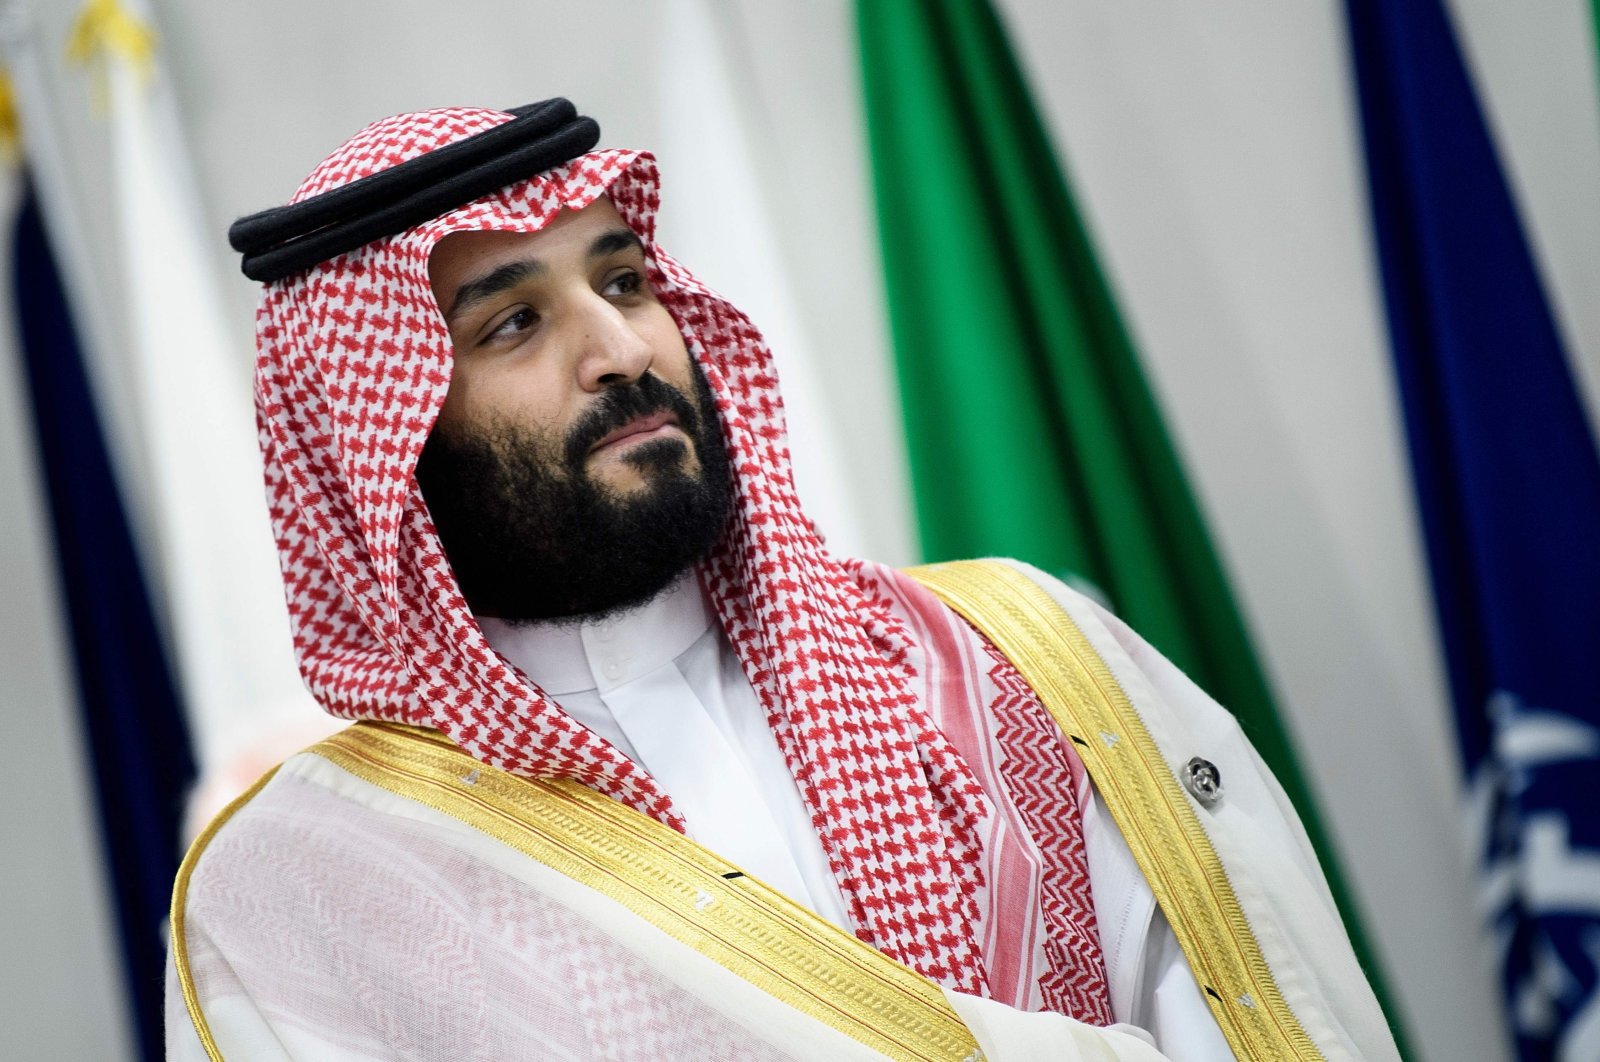 Saudi Arabia's Crown Prince Mohammed bin Salman attends a meeting during the G-20 Summit in Osaka, June 28, 2019, (AFP Photo)